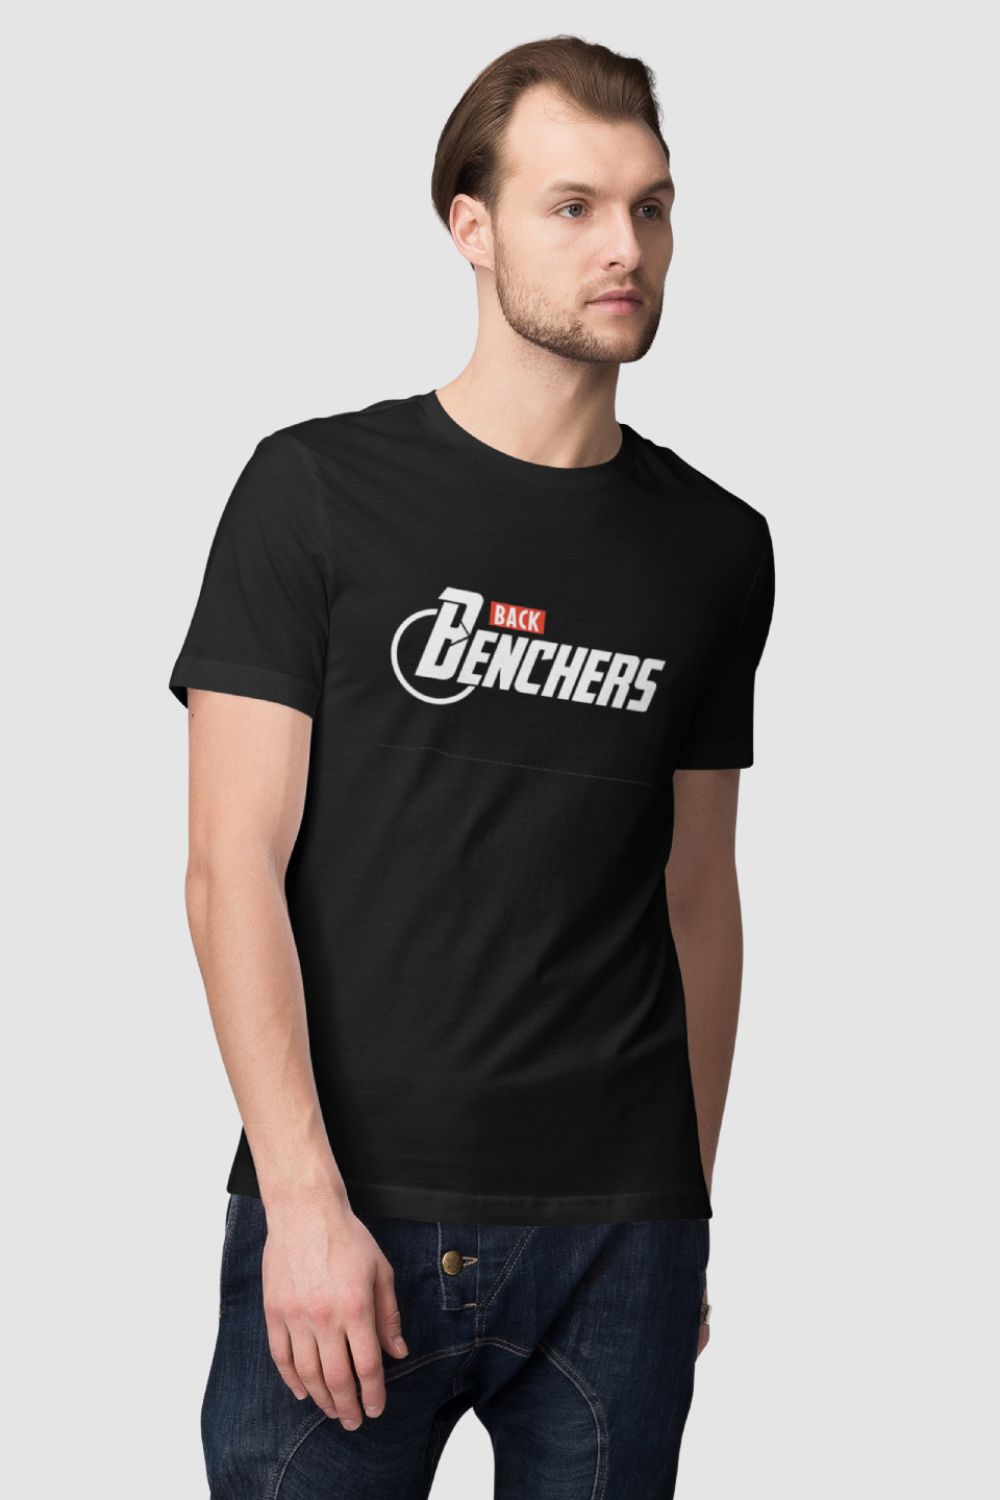 Back Benchers Not The Avengers Graphic Printed Black Tshirt